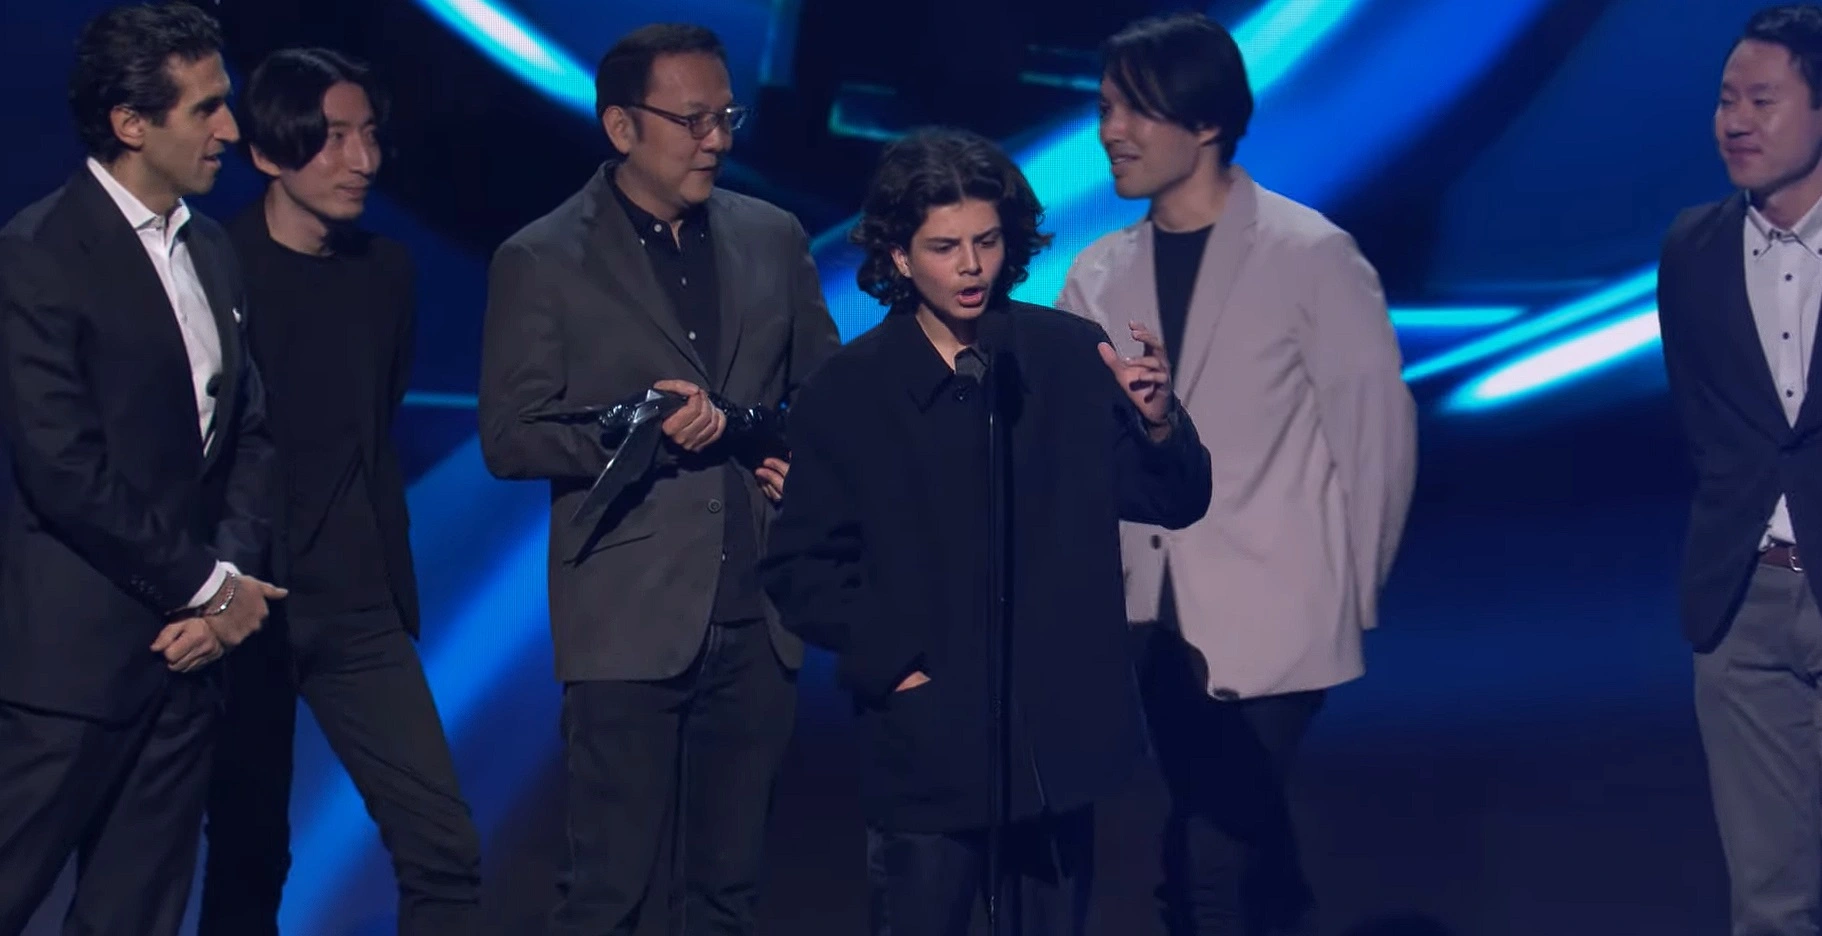 Kid Thanks Orthodox Rabbi Bill Clinton During The Game Awards GOTY  Speech, Is Arrested - GamerBraves